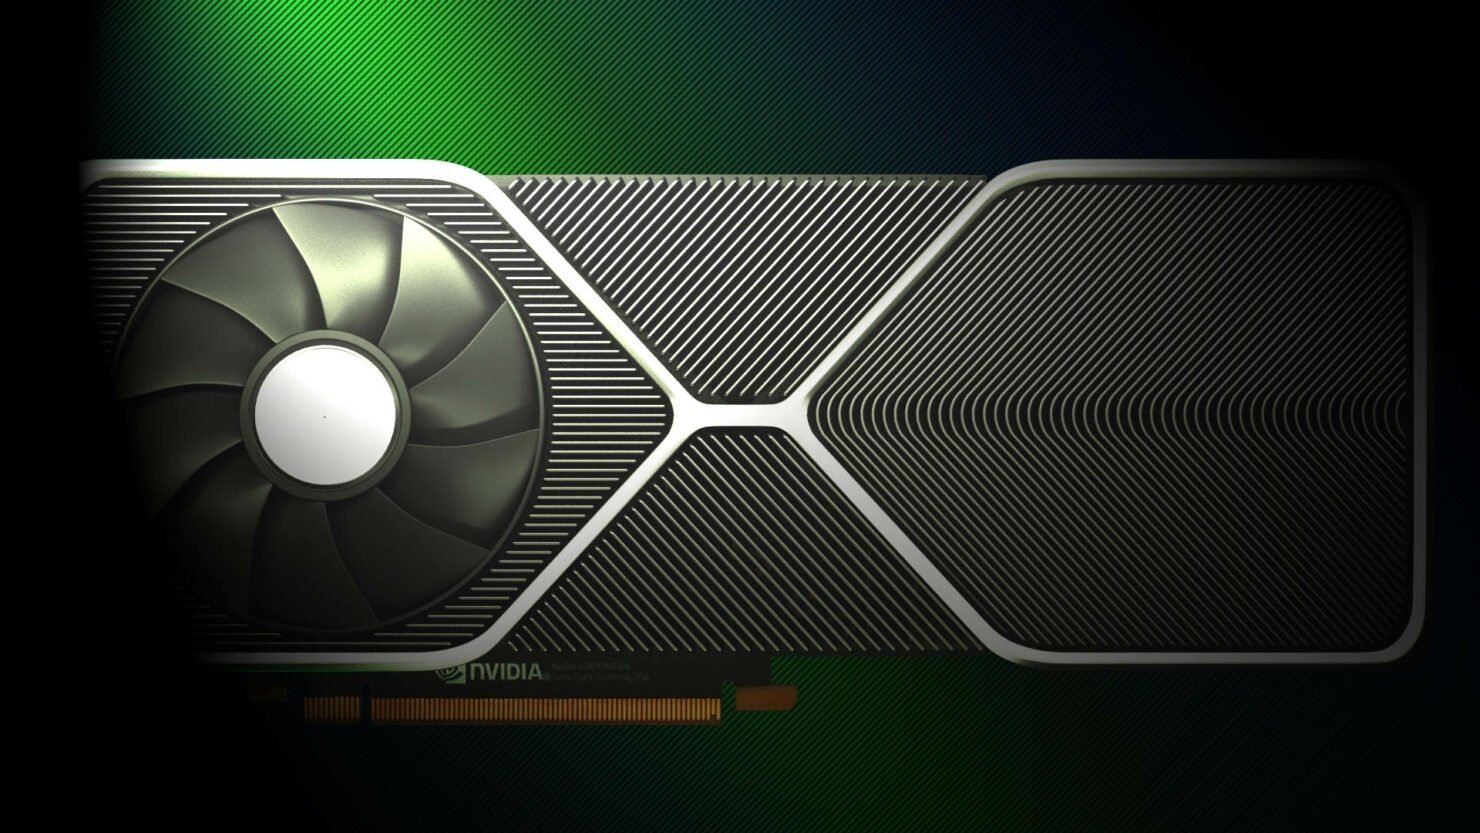 Here are some leaked specs on the NVIDIA GeForce RTX 3090 | TweakTown